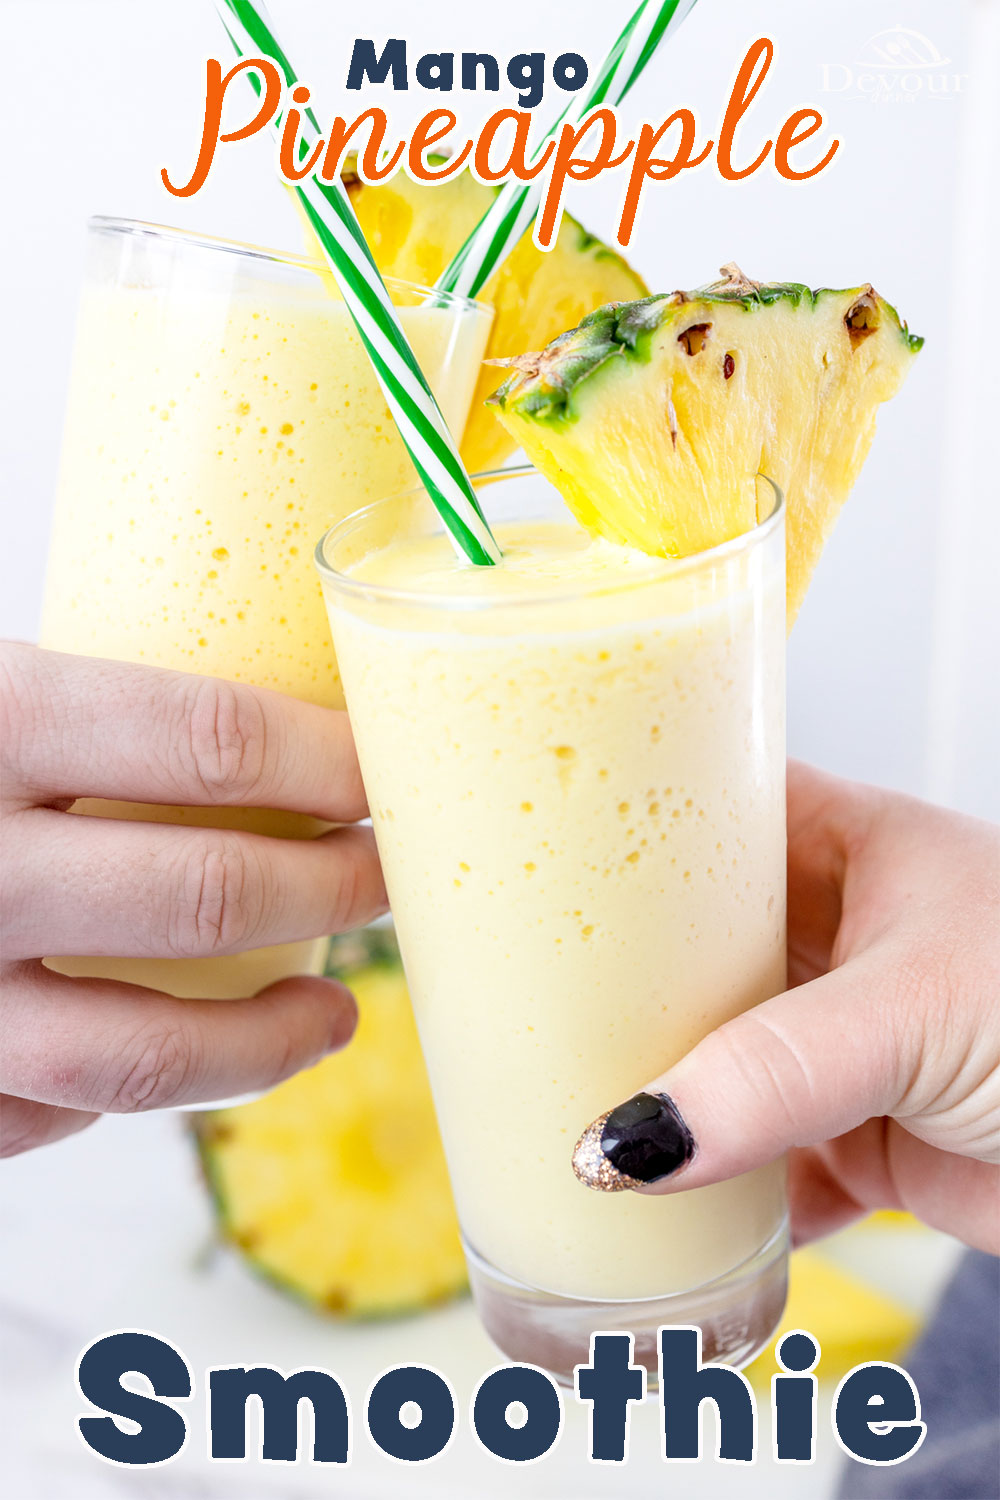 Creamy Mango Pineapple Smoothie a McDonalds Copycat Recipe. Get refreshed with a healthy Mango Pineapple Smoothie made with almond milk, pineapple juice, frozen mango, frozen pineapple, and Greek yogurt. Quick and easy!